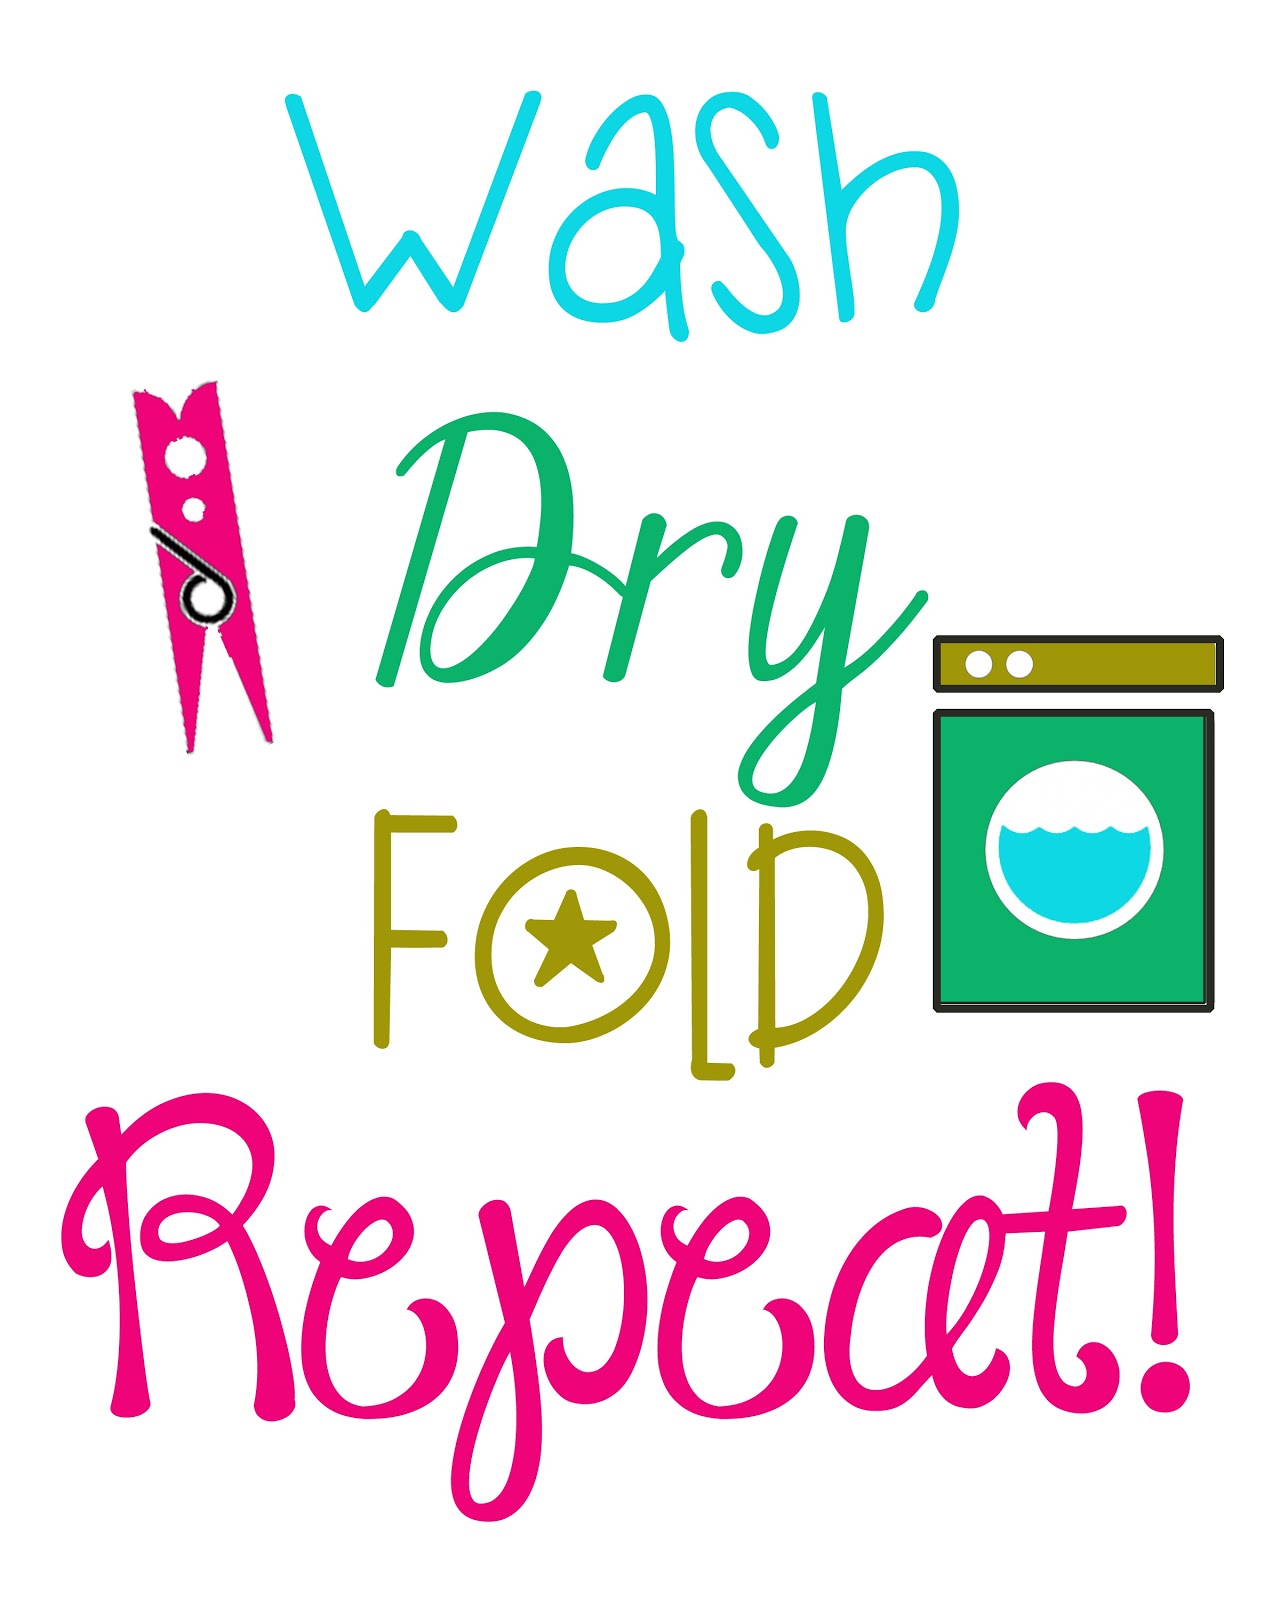 Free Printable Laundry Labels